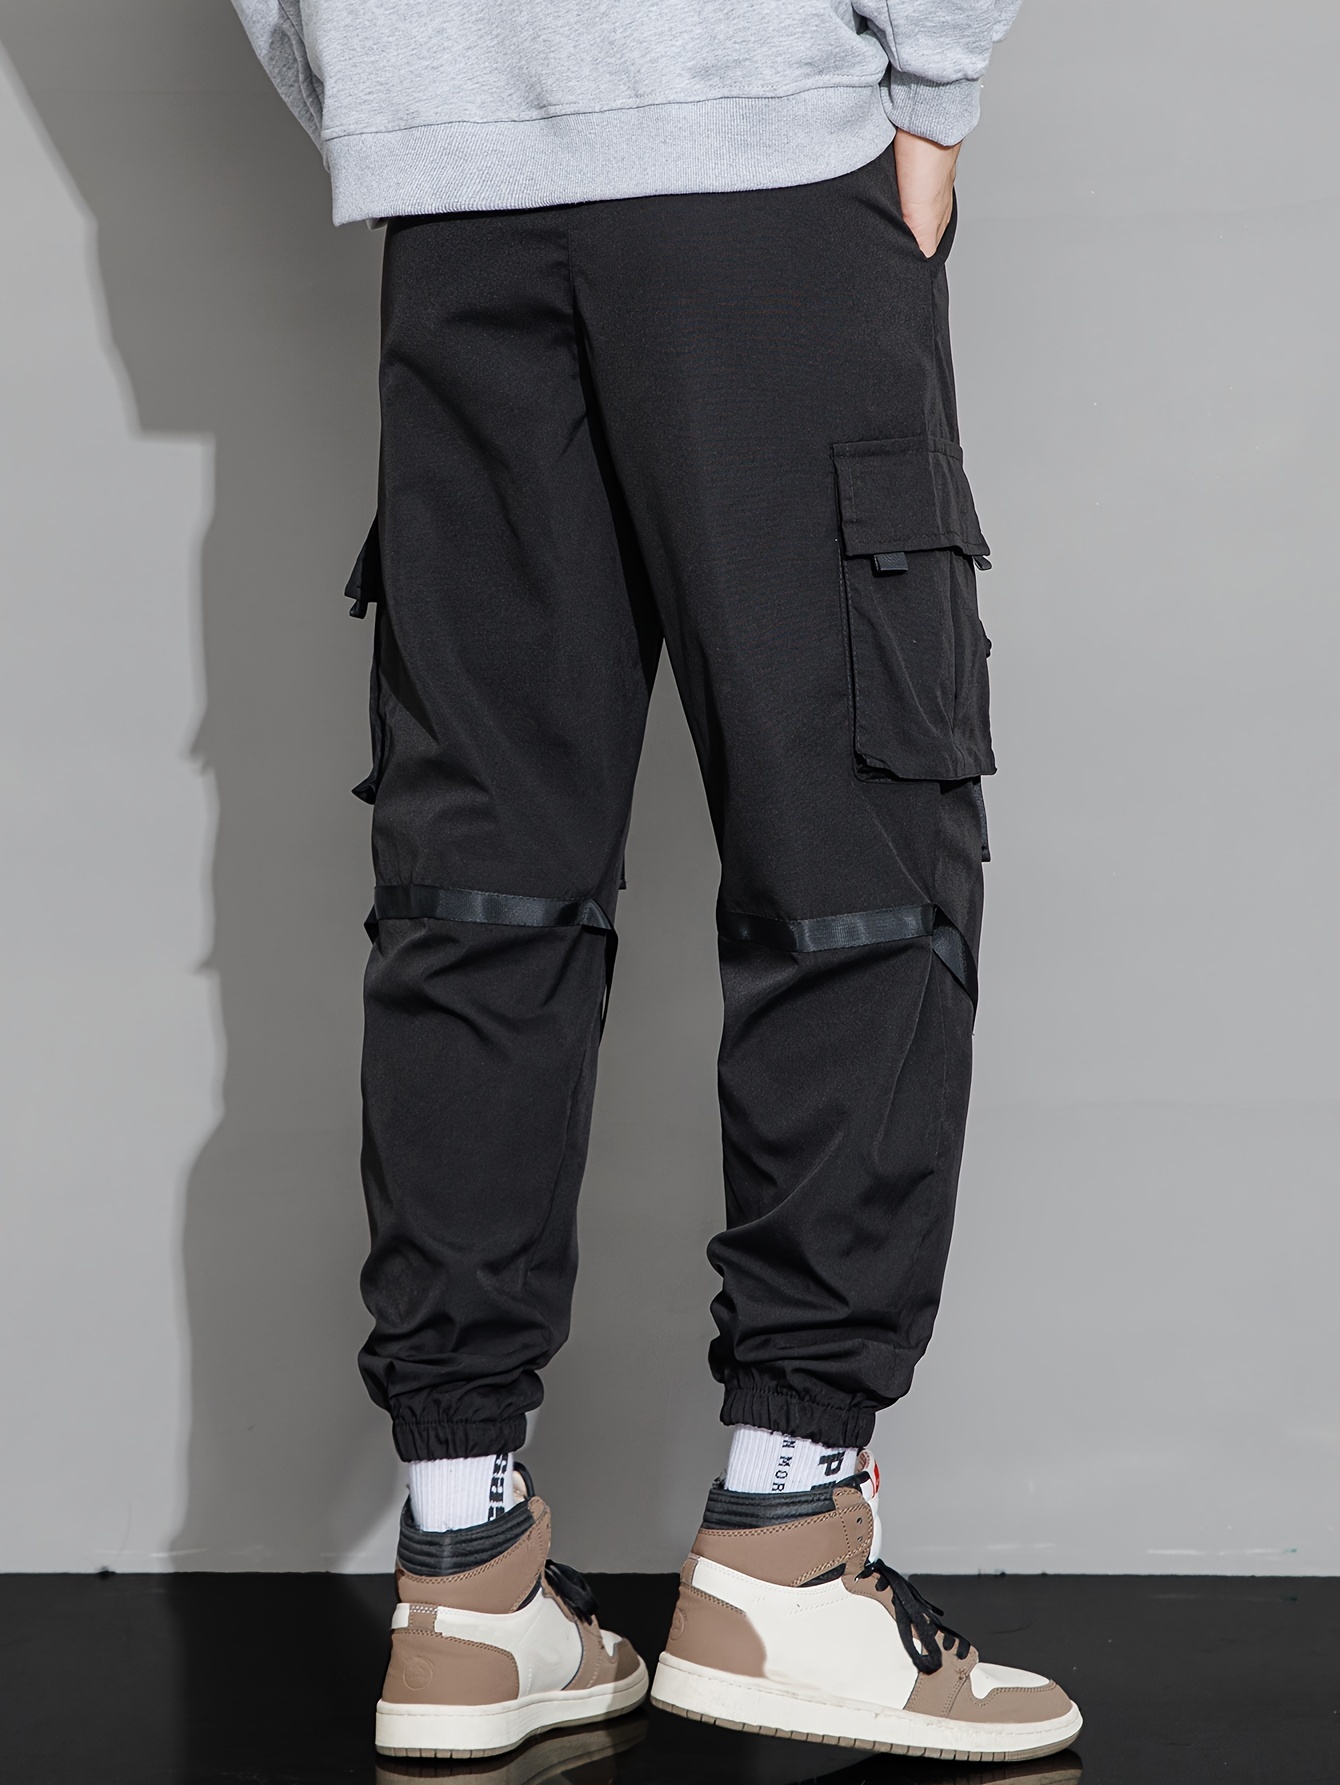 Mens Pants CARGO FLARE PANTS Pocket Ribbon Overalls Micro Casual Fashion  Fitness High Street From Cinda01, $71.38